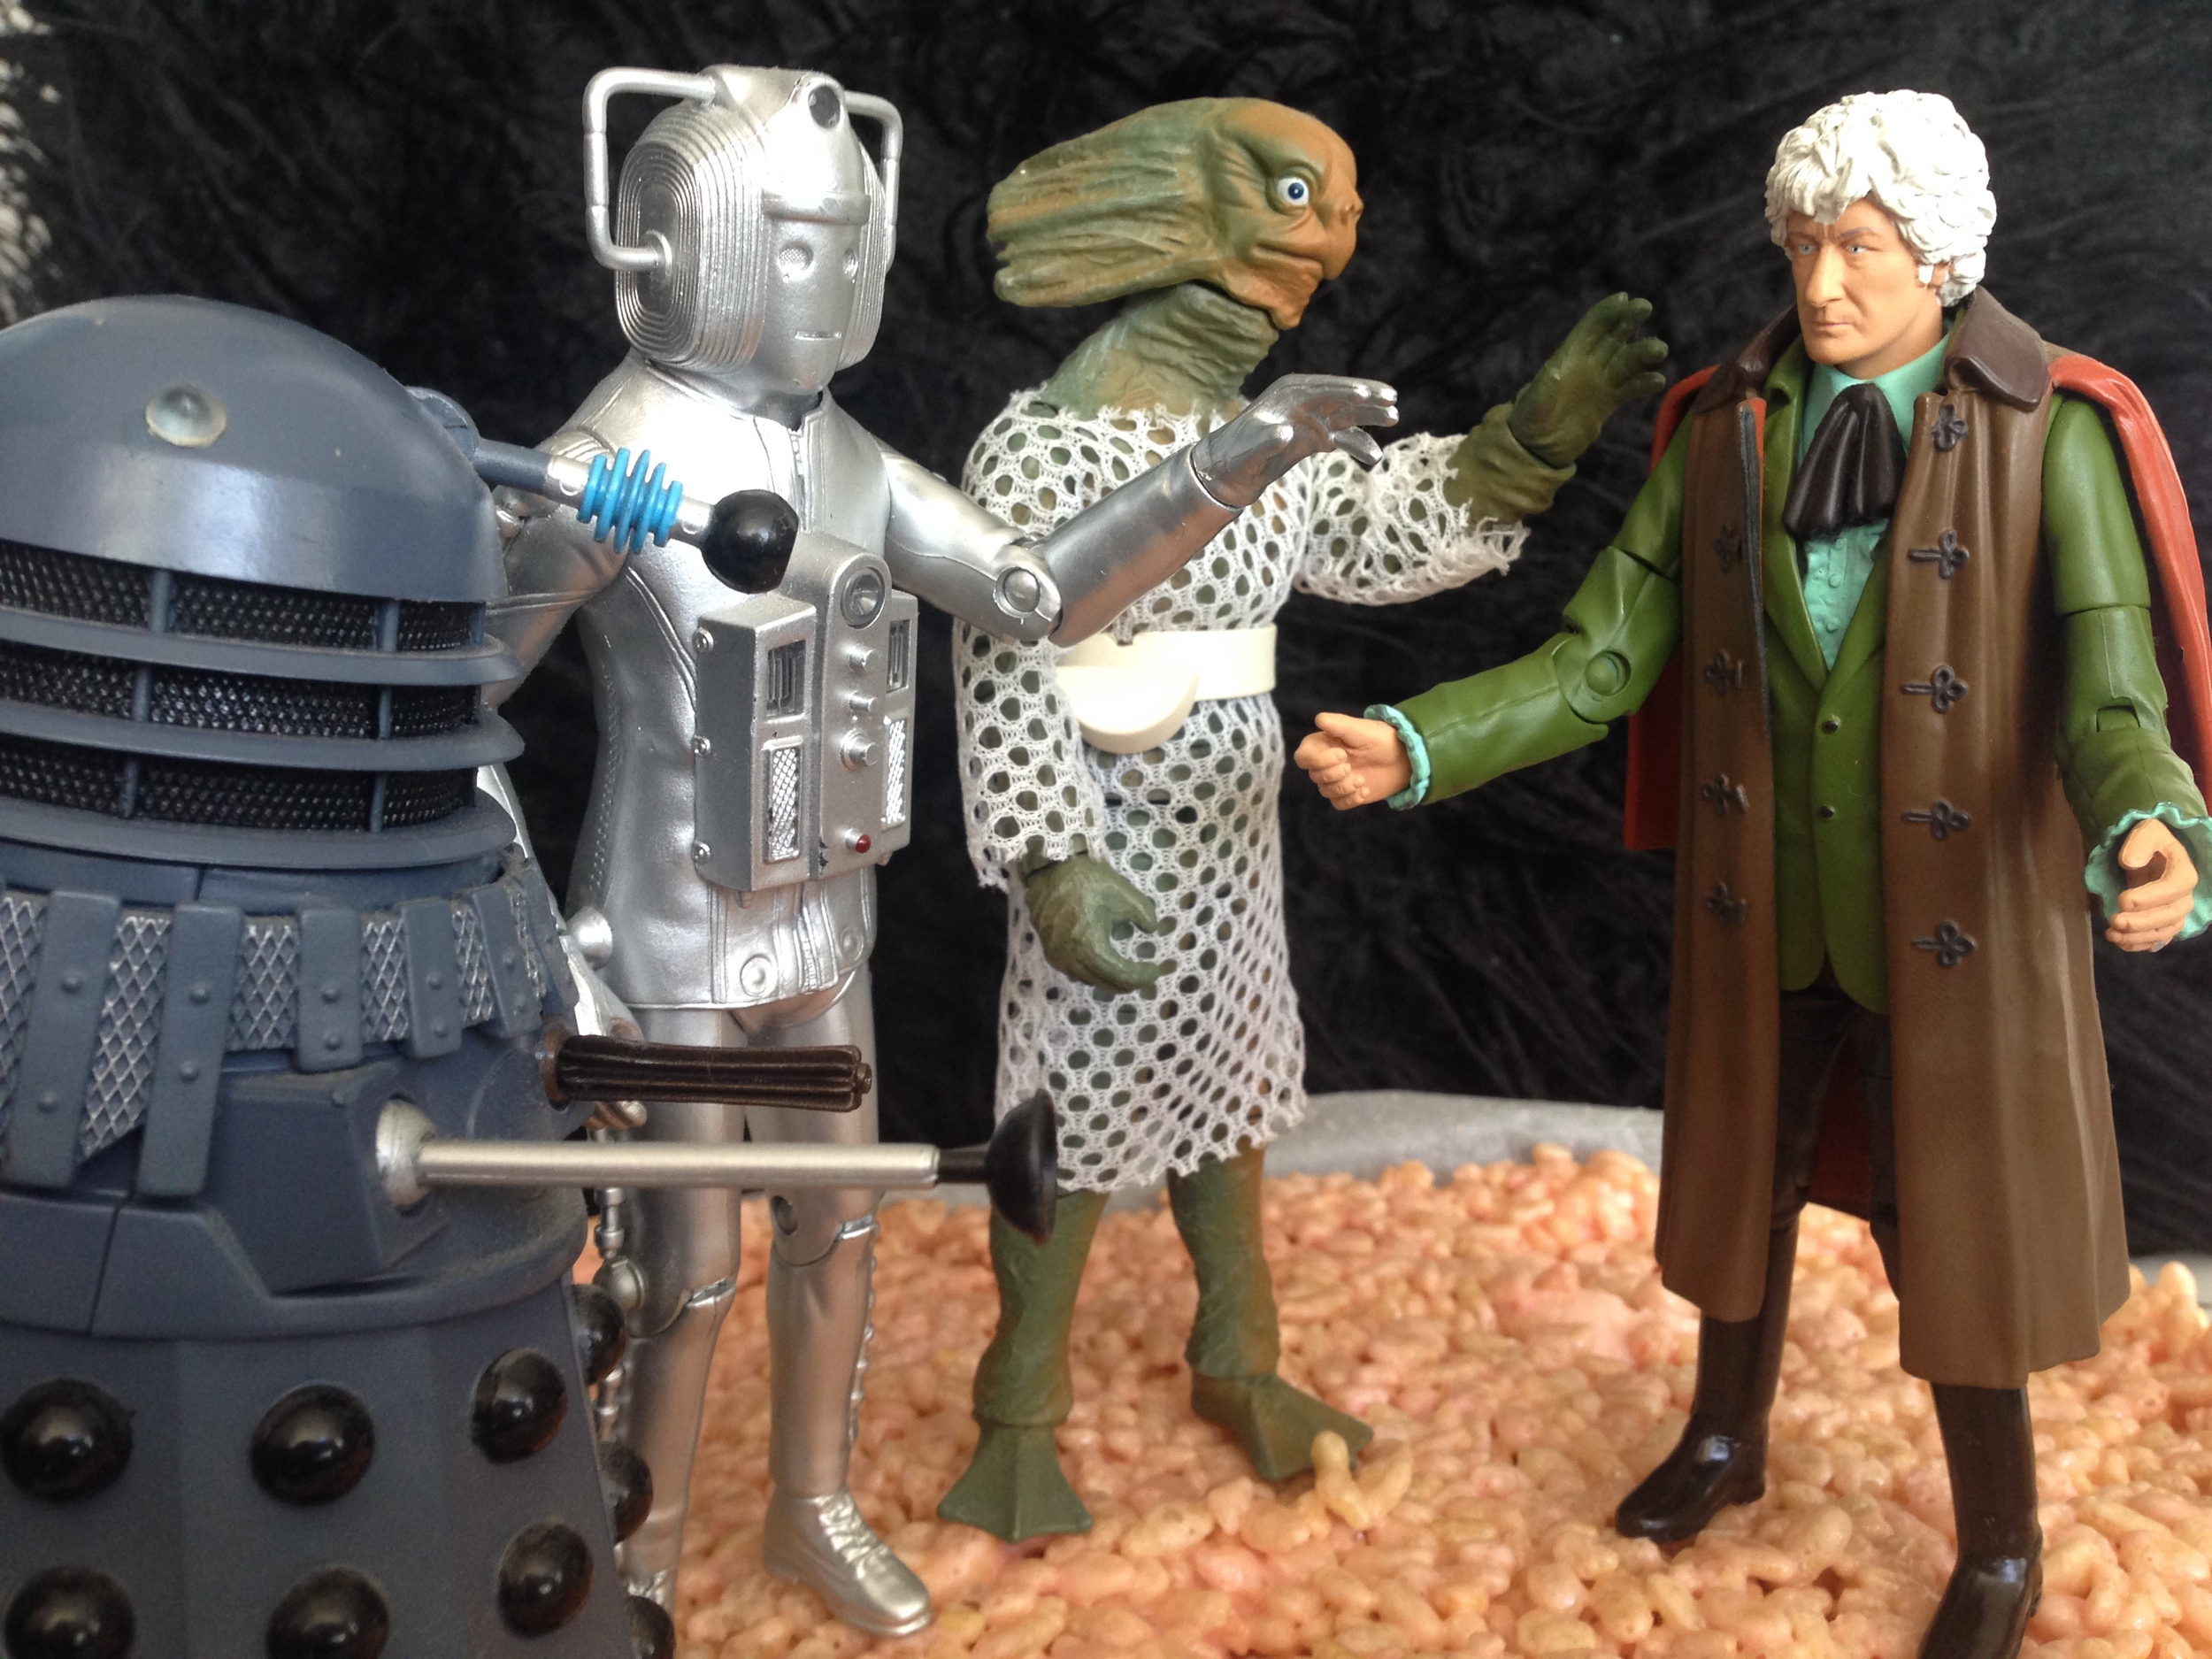 A tray of a slice made of rice bubbles with some Third-Doctor era character figures on top